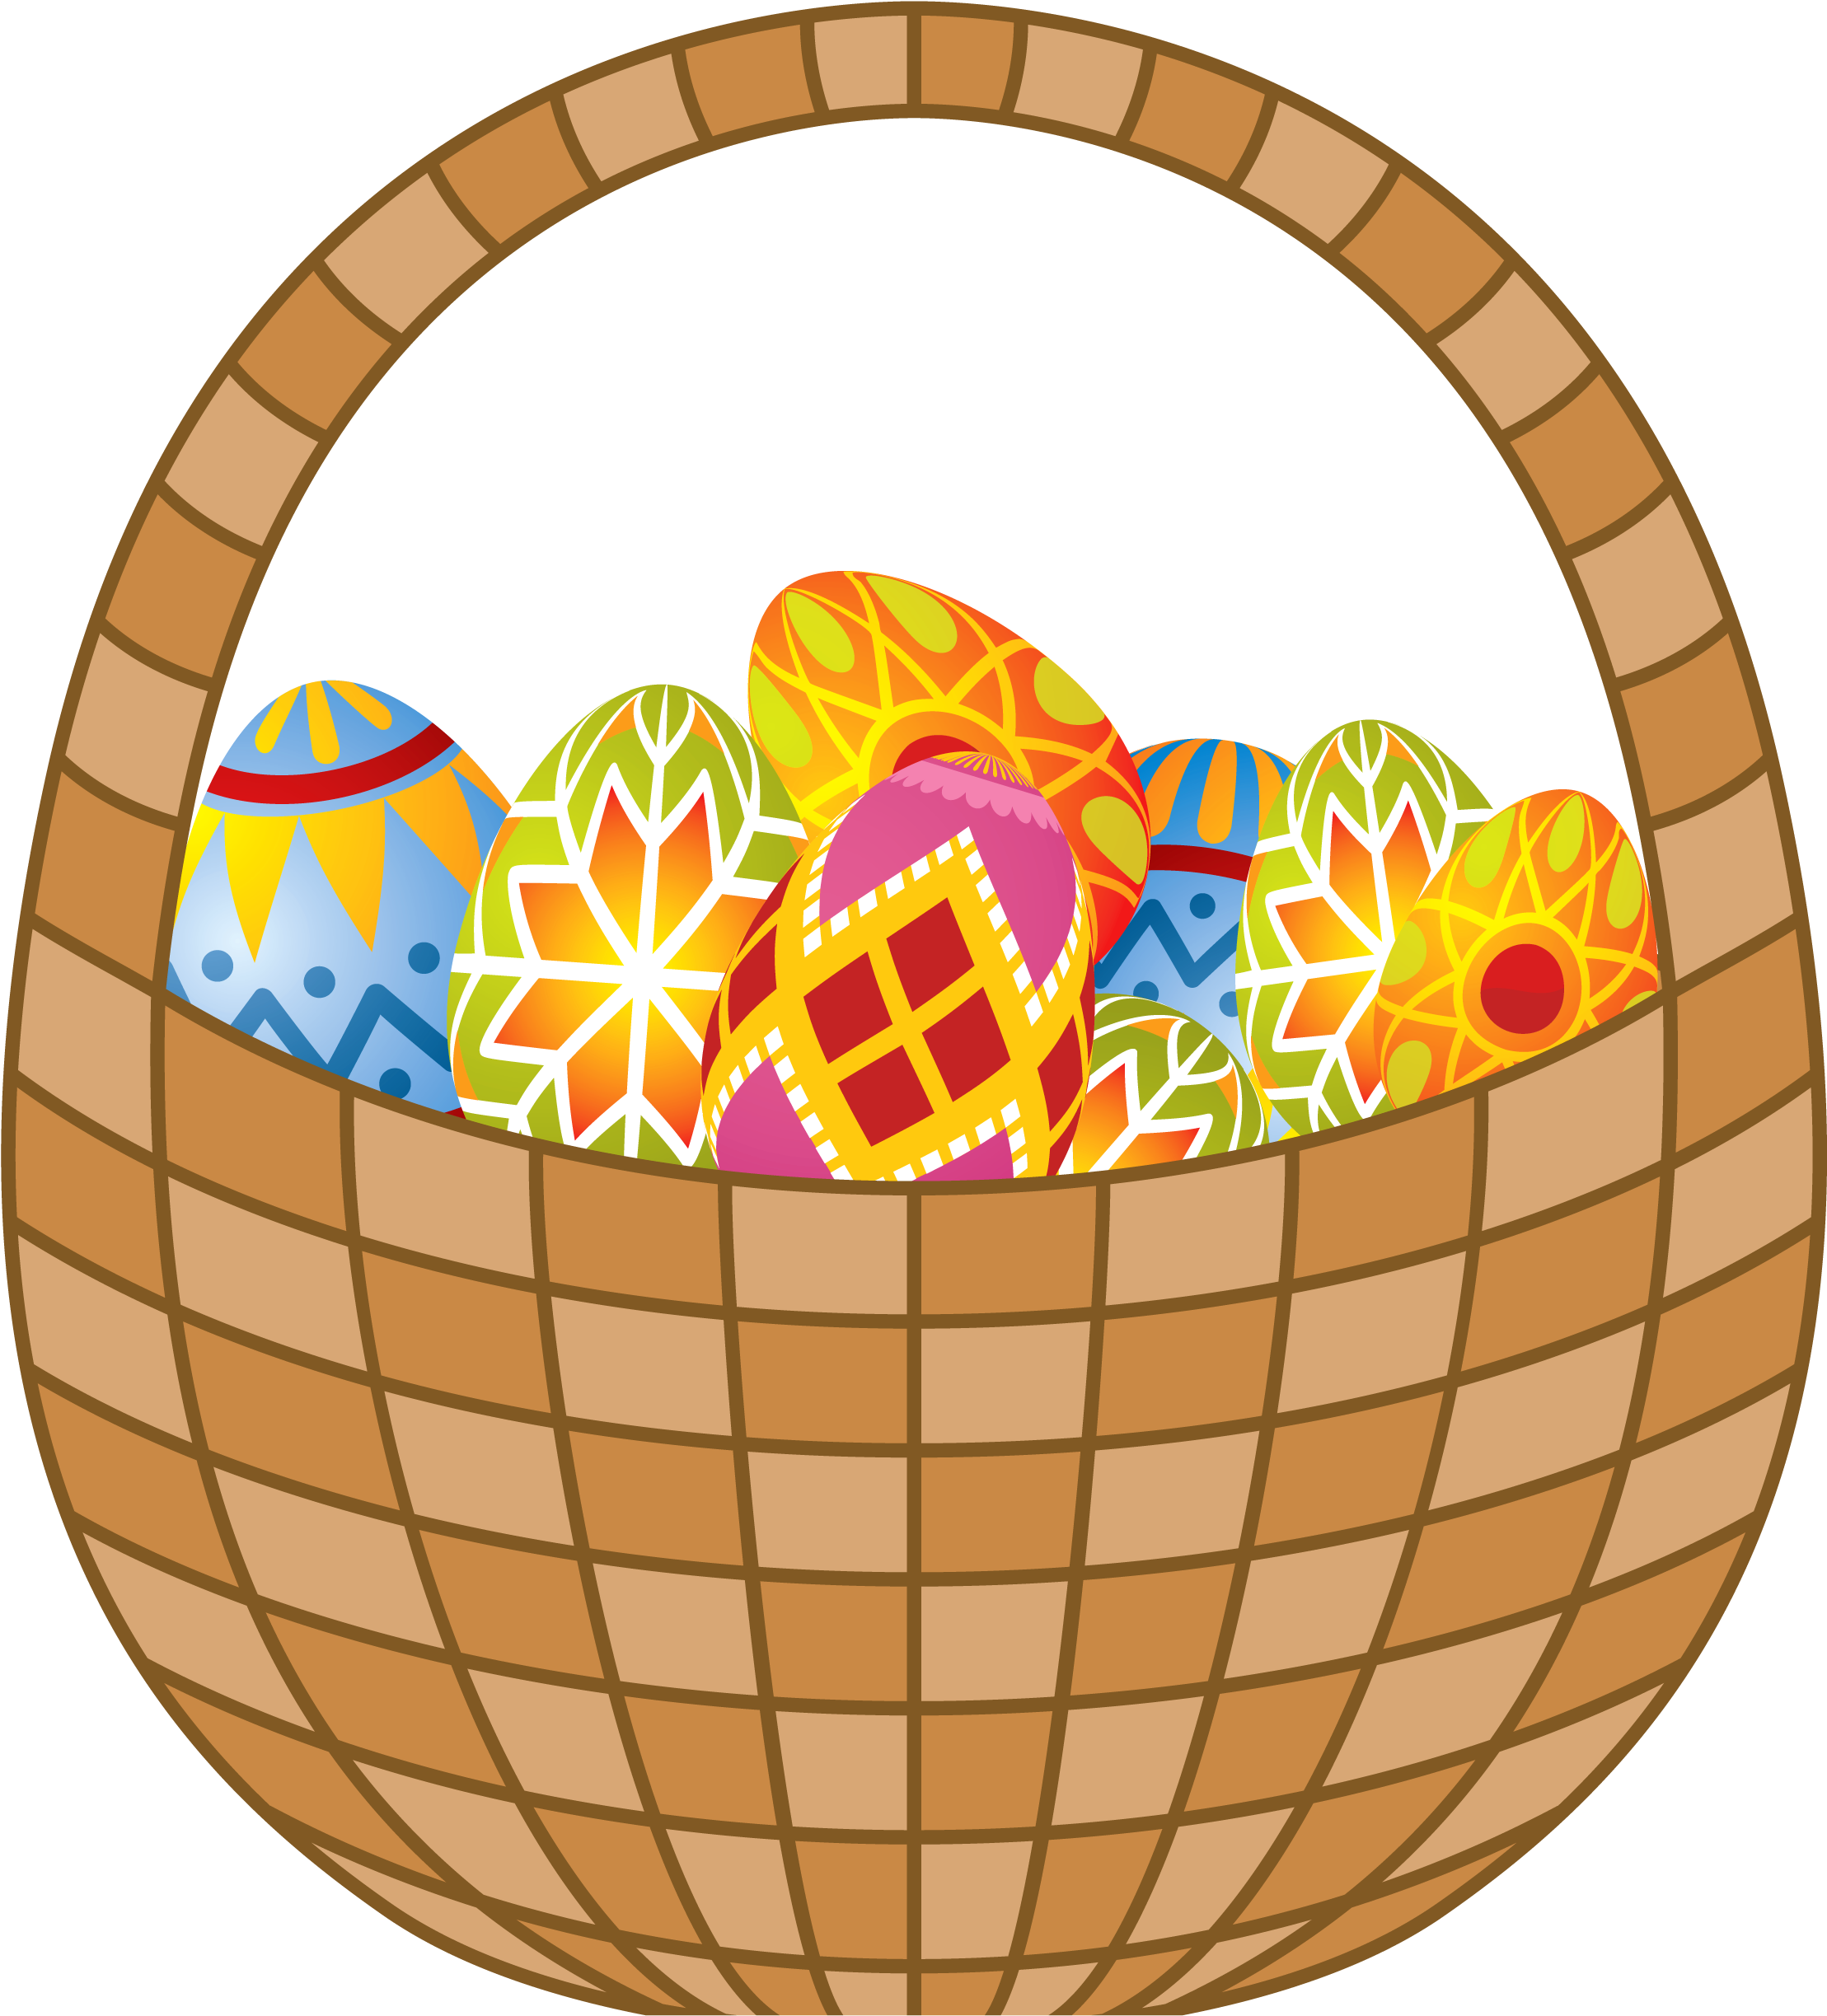 A Basket Of Eggs With Different Designs